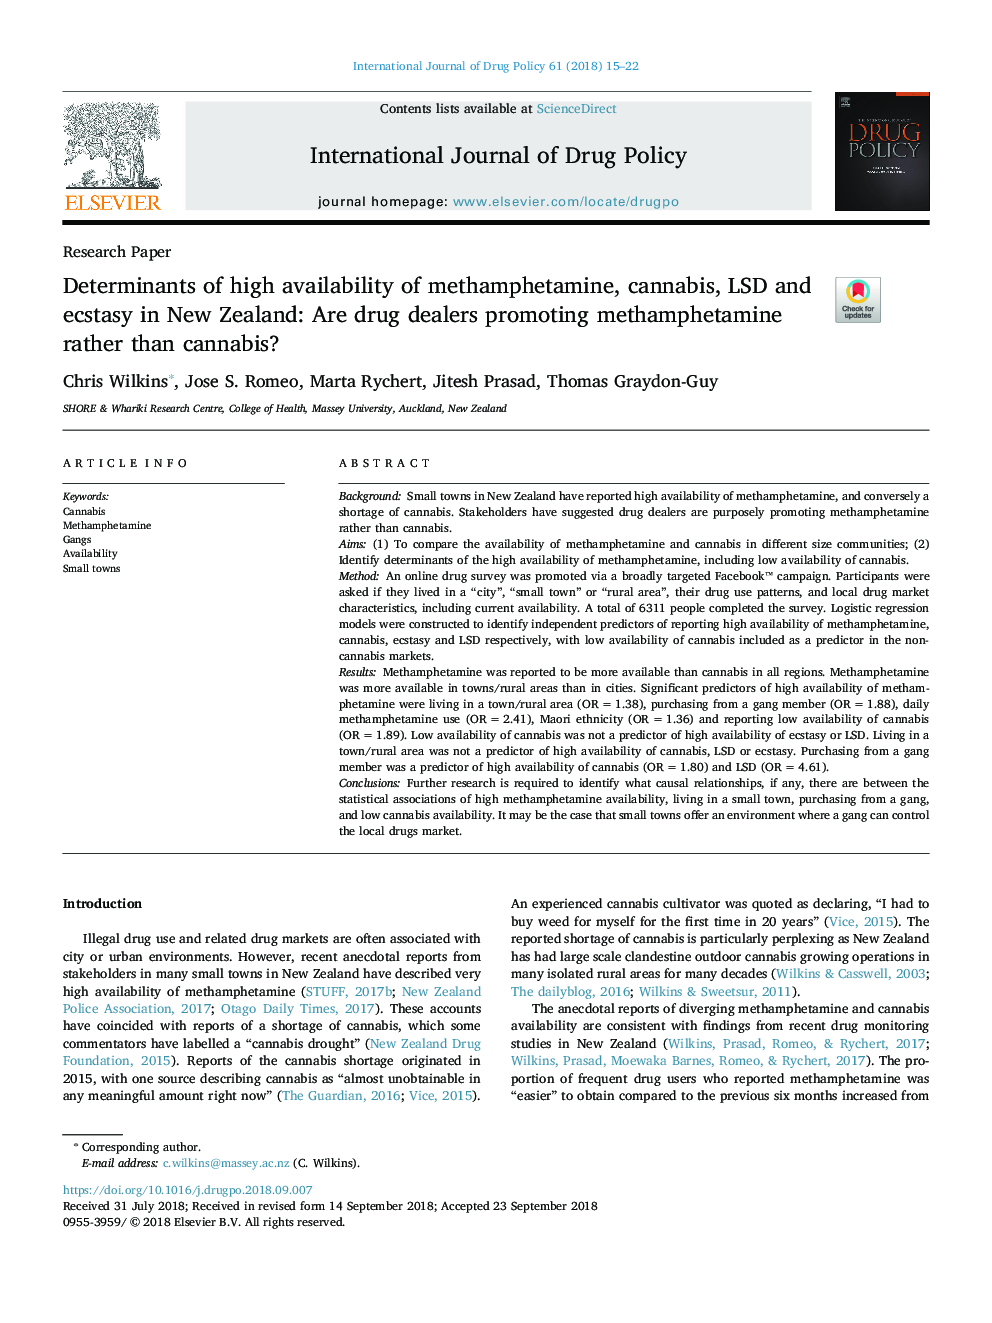 Determinants of high availability of methamphetamine, cannabis, LSD and ecstasy in New Zealand: Are drug dealers promoting methamphetamine rather than cannabis?